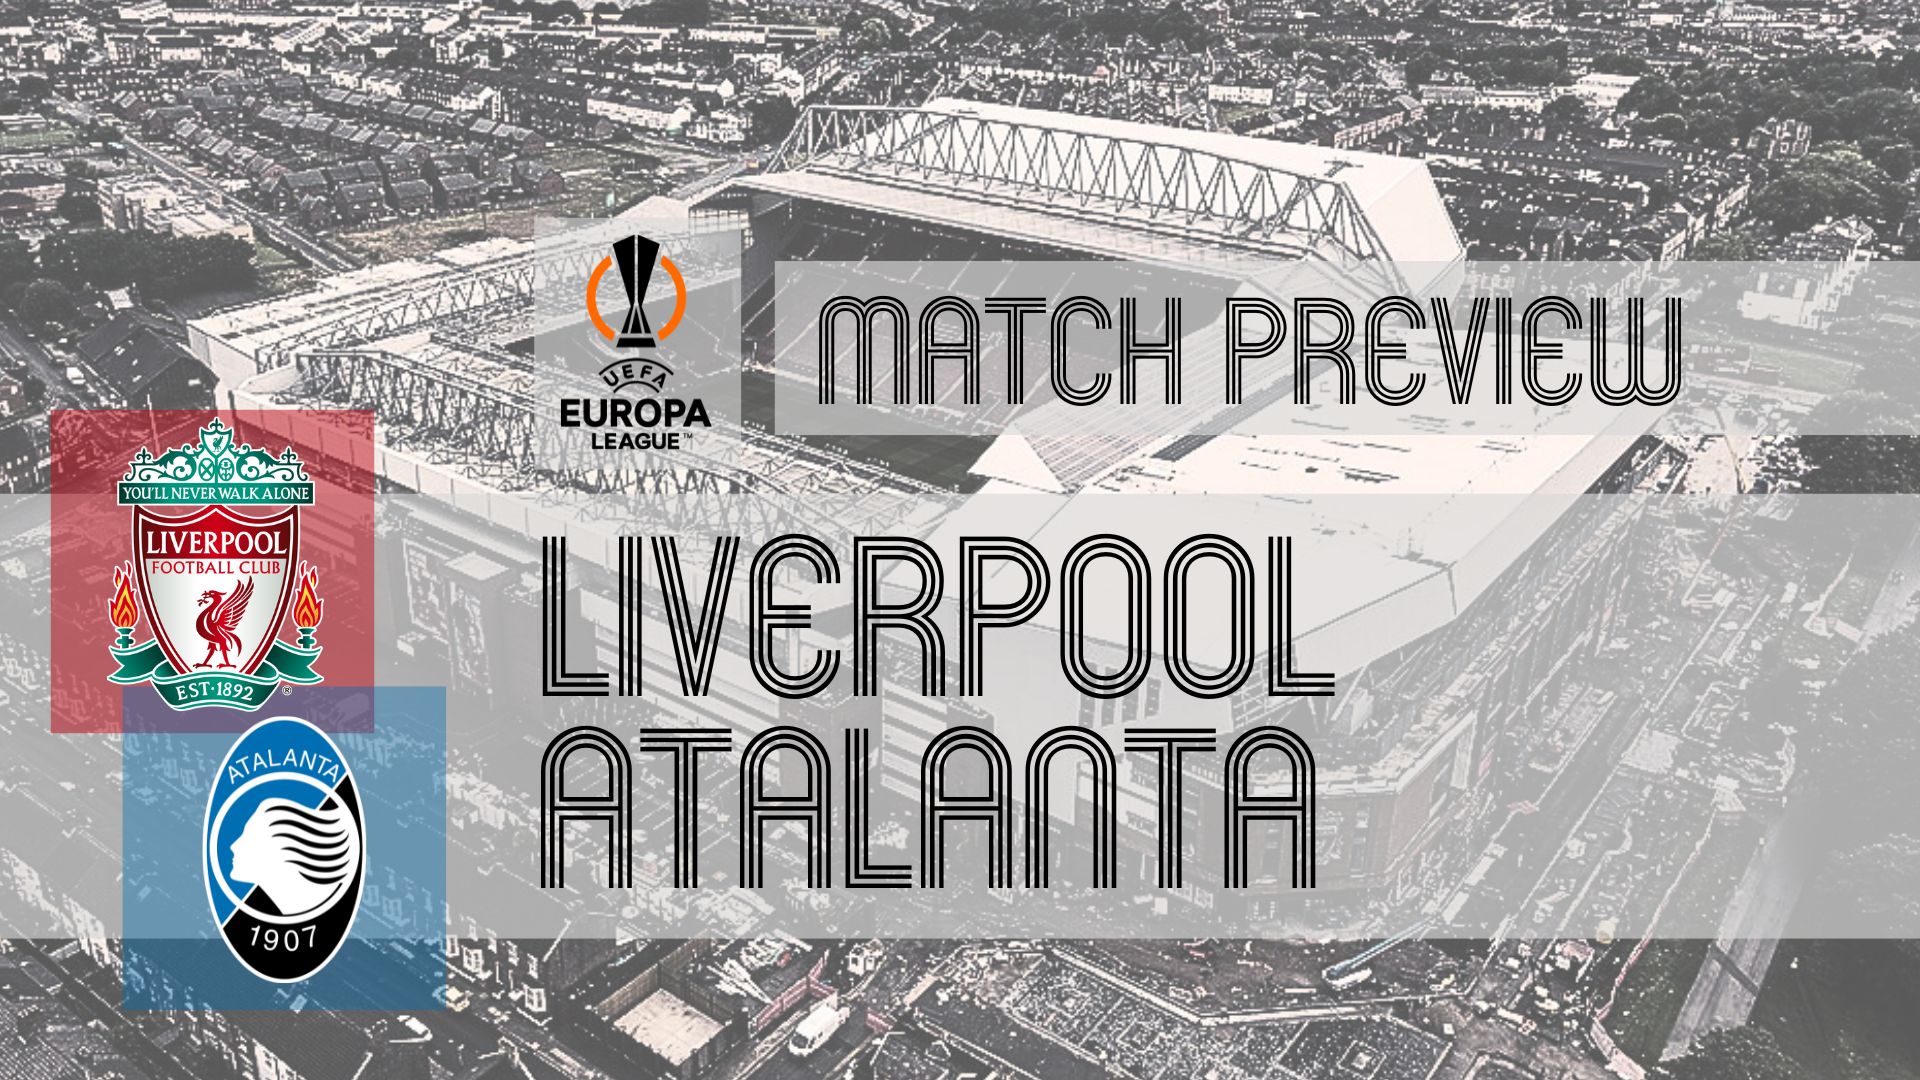 A mammoth task awaits Atalanta in the Europa League quarter-finals as they head to Anfield to take on Liverpool in the first leg on Thursday